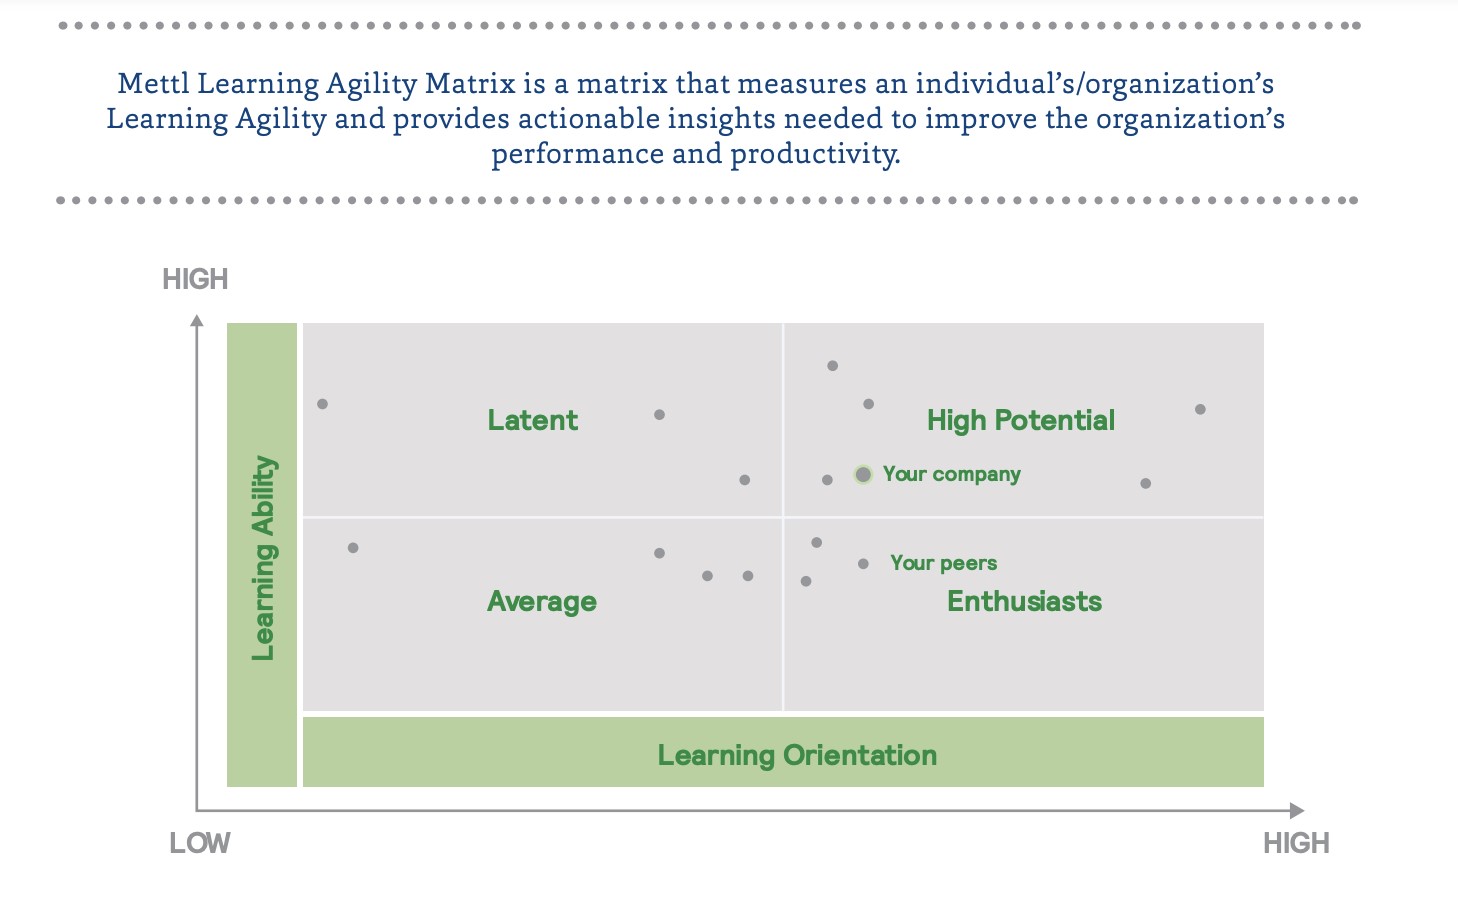 Mettl's Learning Agility Matrix, which splits learners into four key types: average, latent, high potential, and enthusiasts.